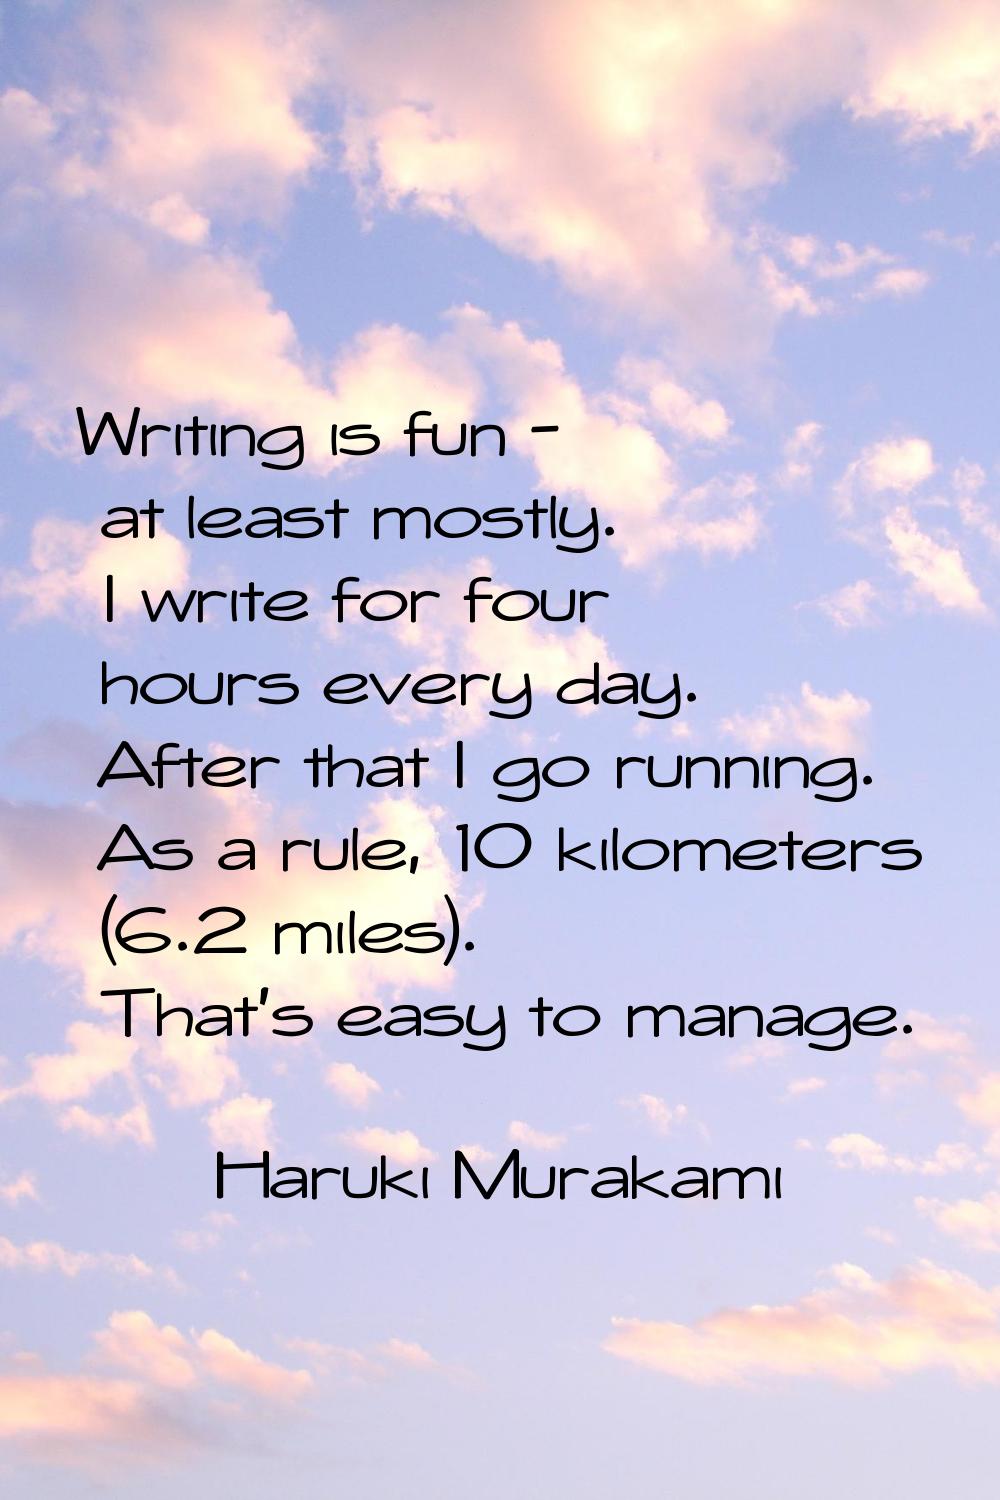 Writing is fun - at least mostly. I write for four hours every day. After that I go running. As a r